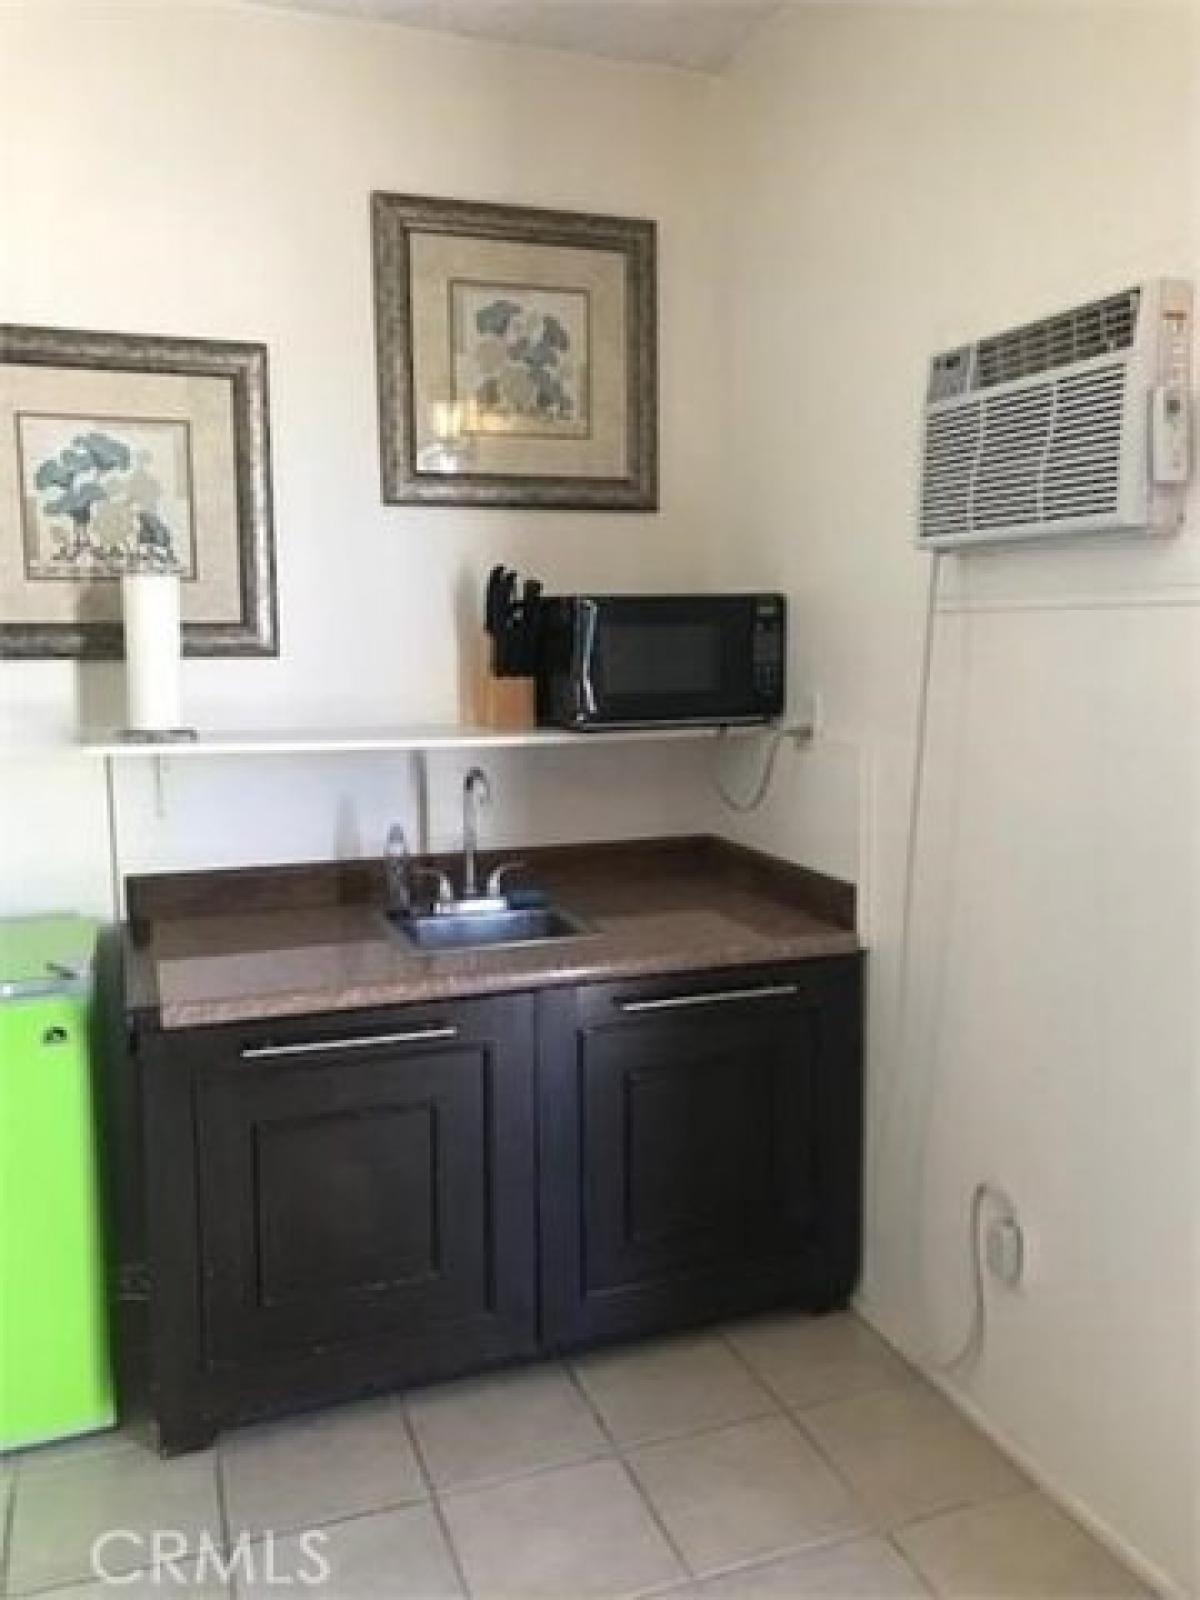 Picture of Apartment For Rent in Twentynine Palms, California, United States